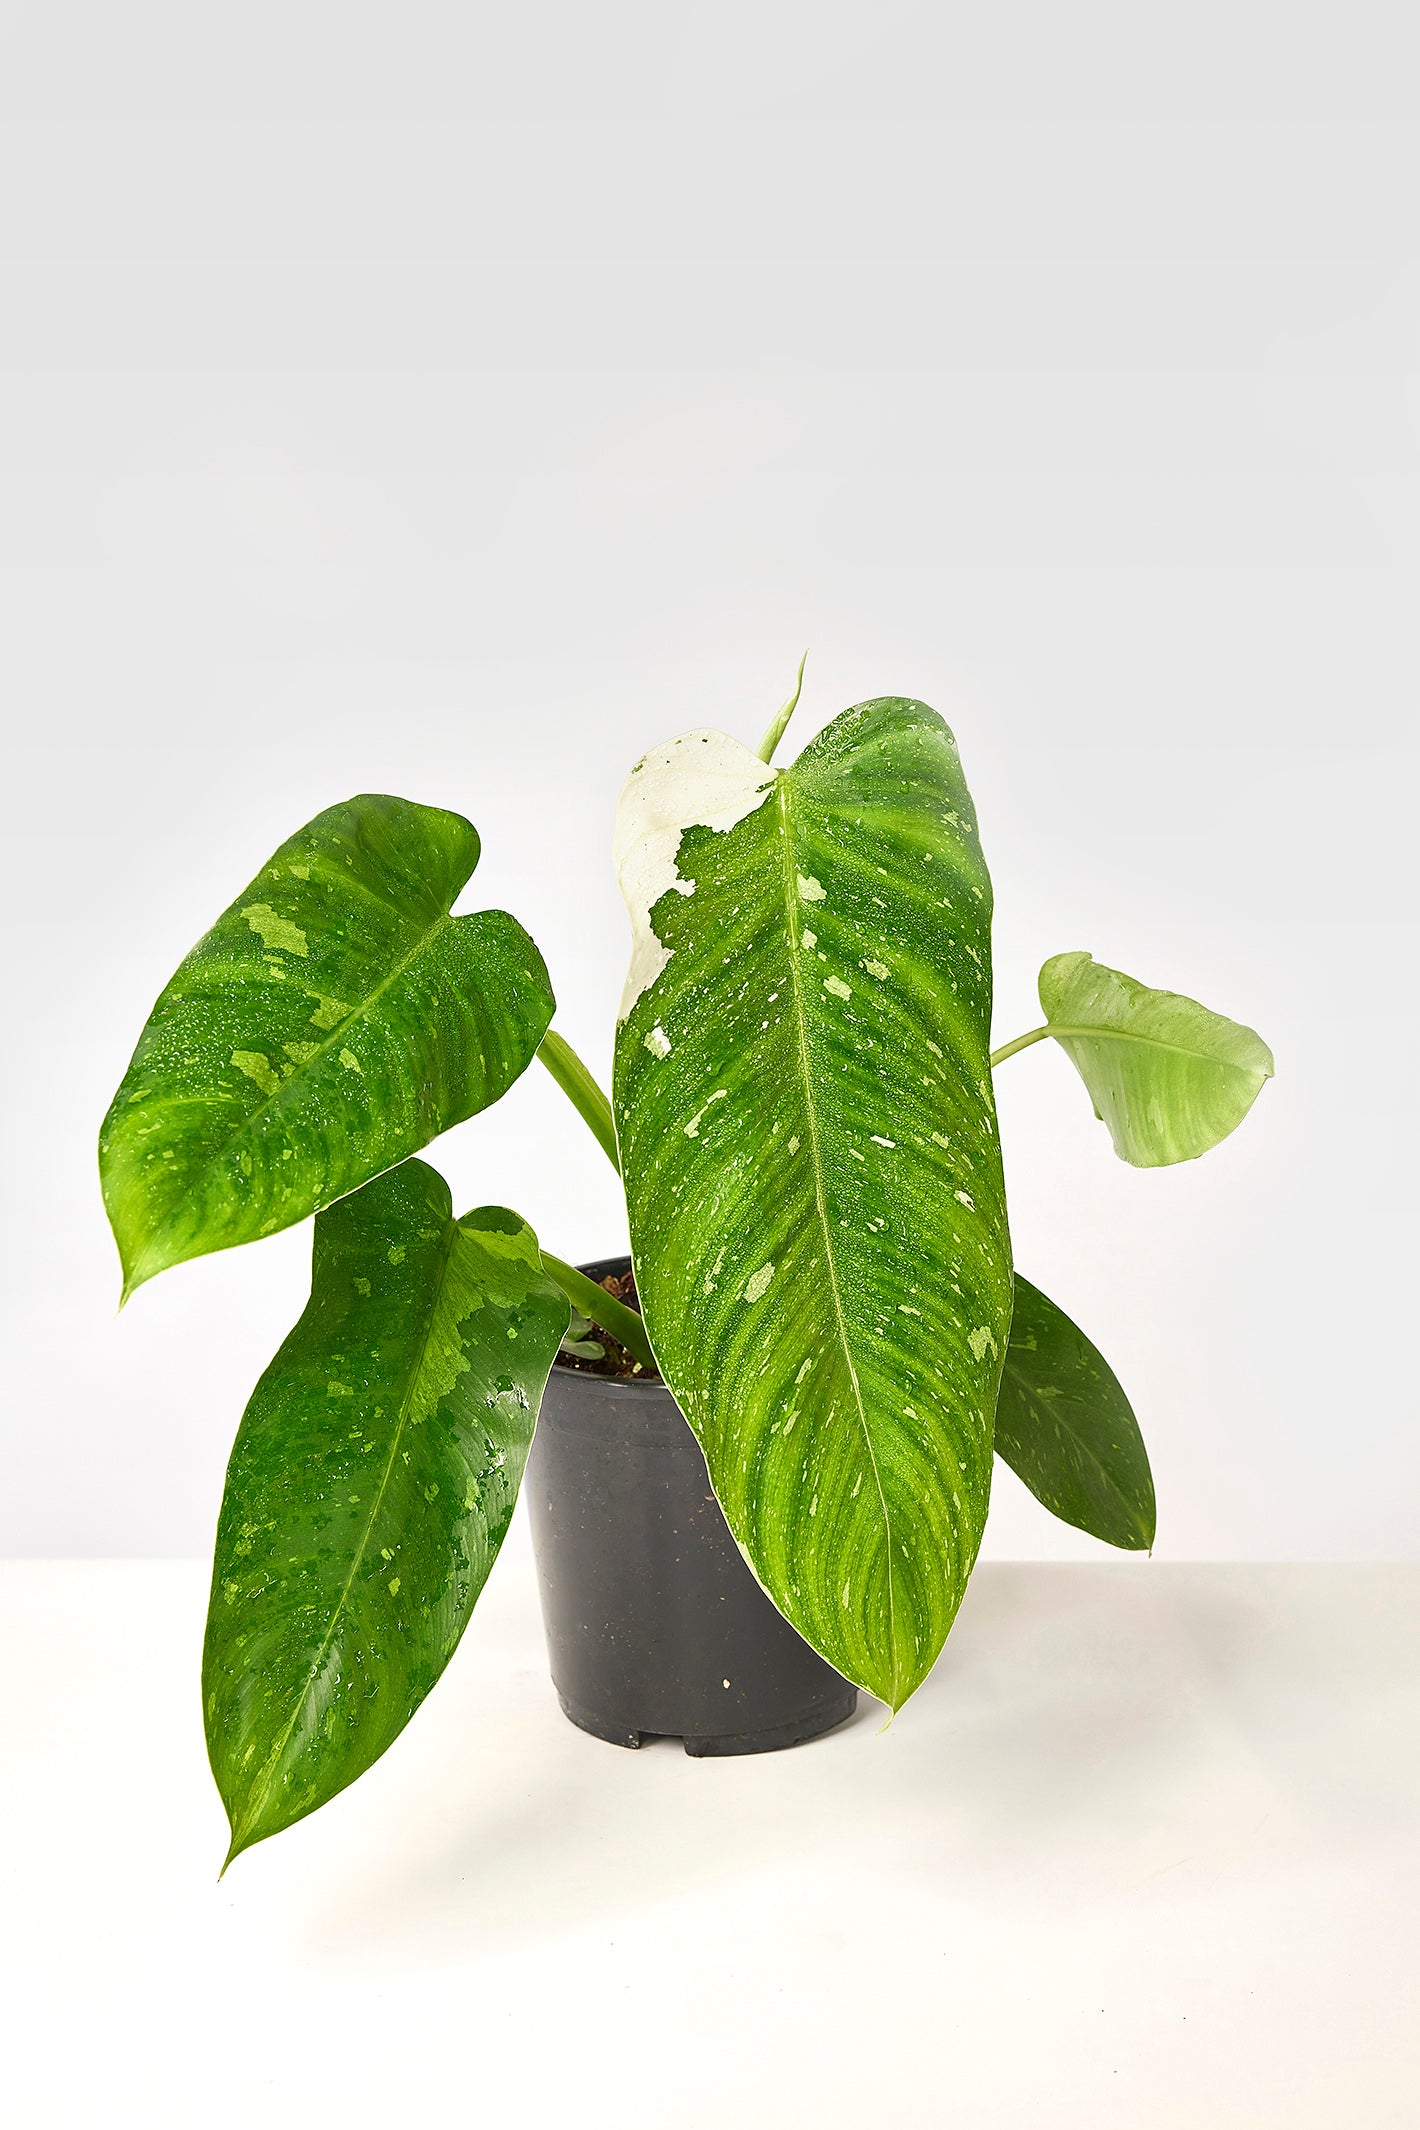 Philodendron Jose Buono (3-4 Leaves) (2 plants in 1 pot)